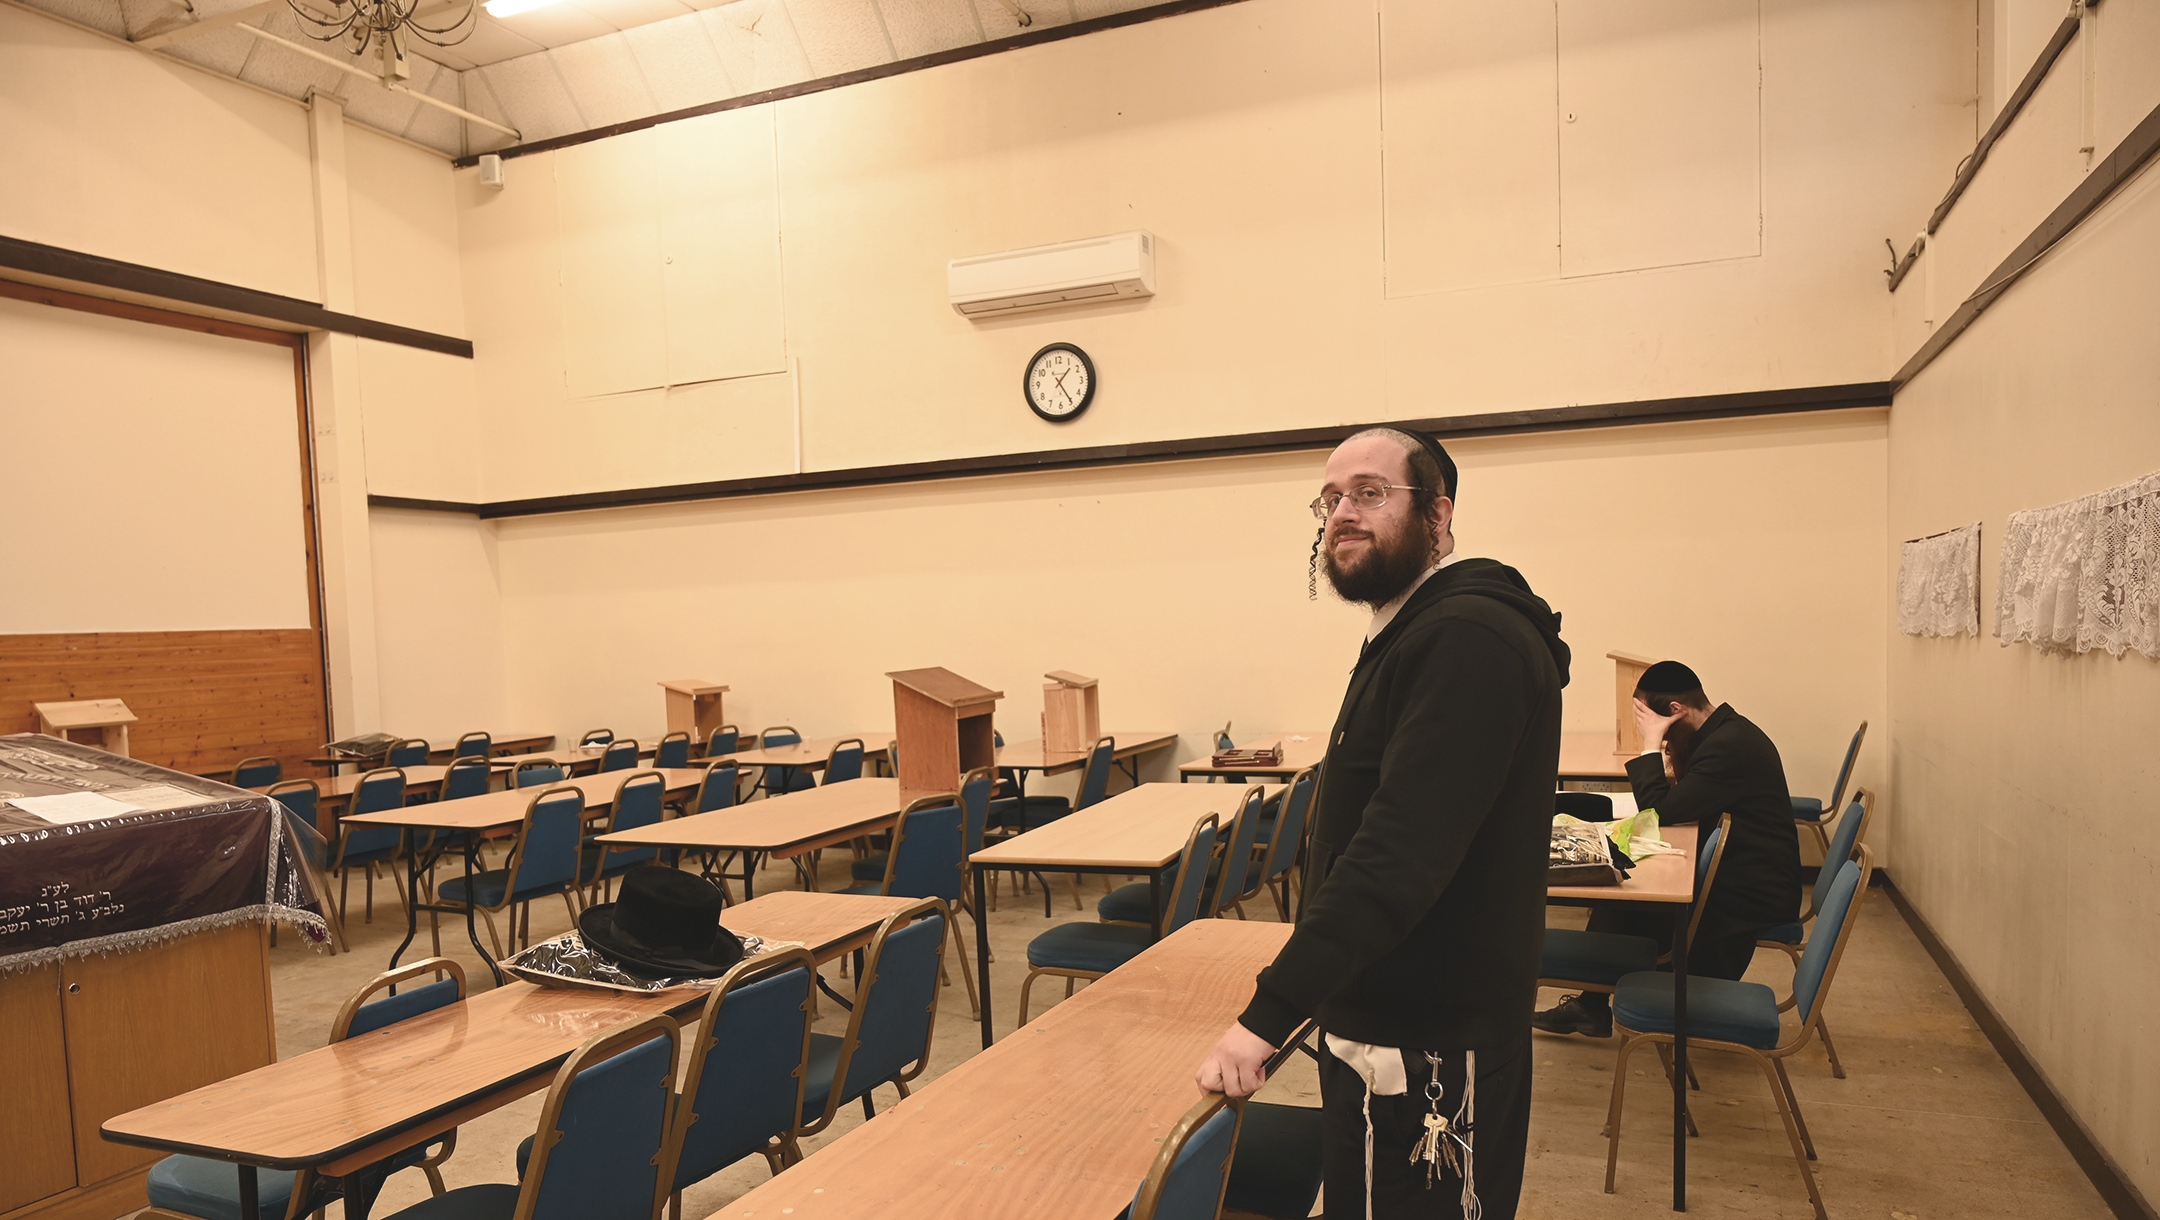 Jacob Gross at the yeshiva and synagogue on Canvey Island, UK on Dec. 13, 2019. (Cnaan Liphshiz)